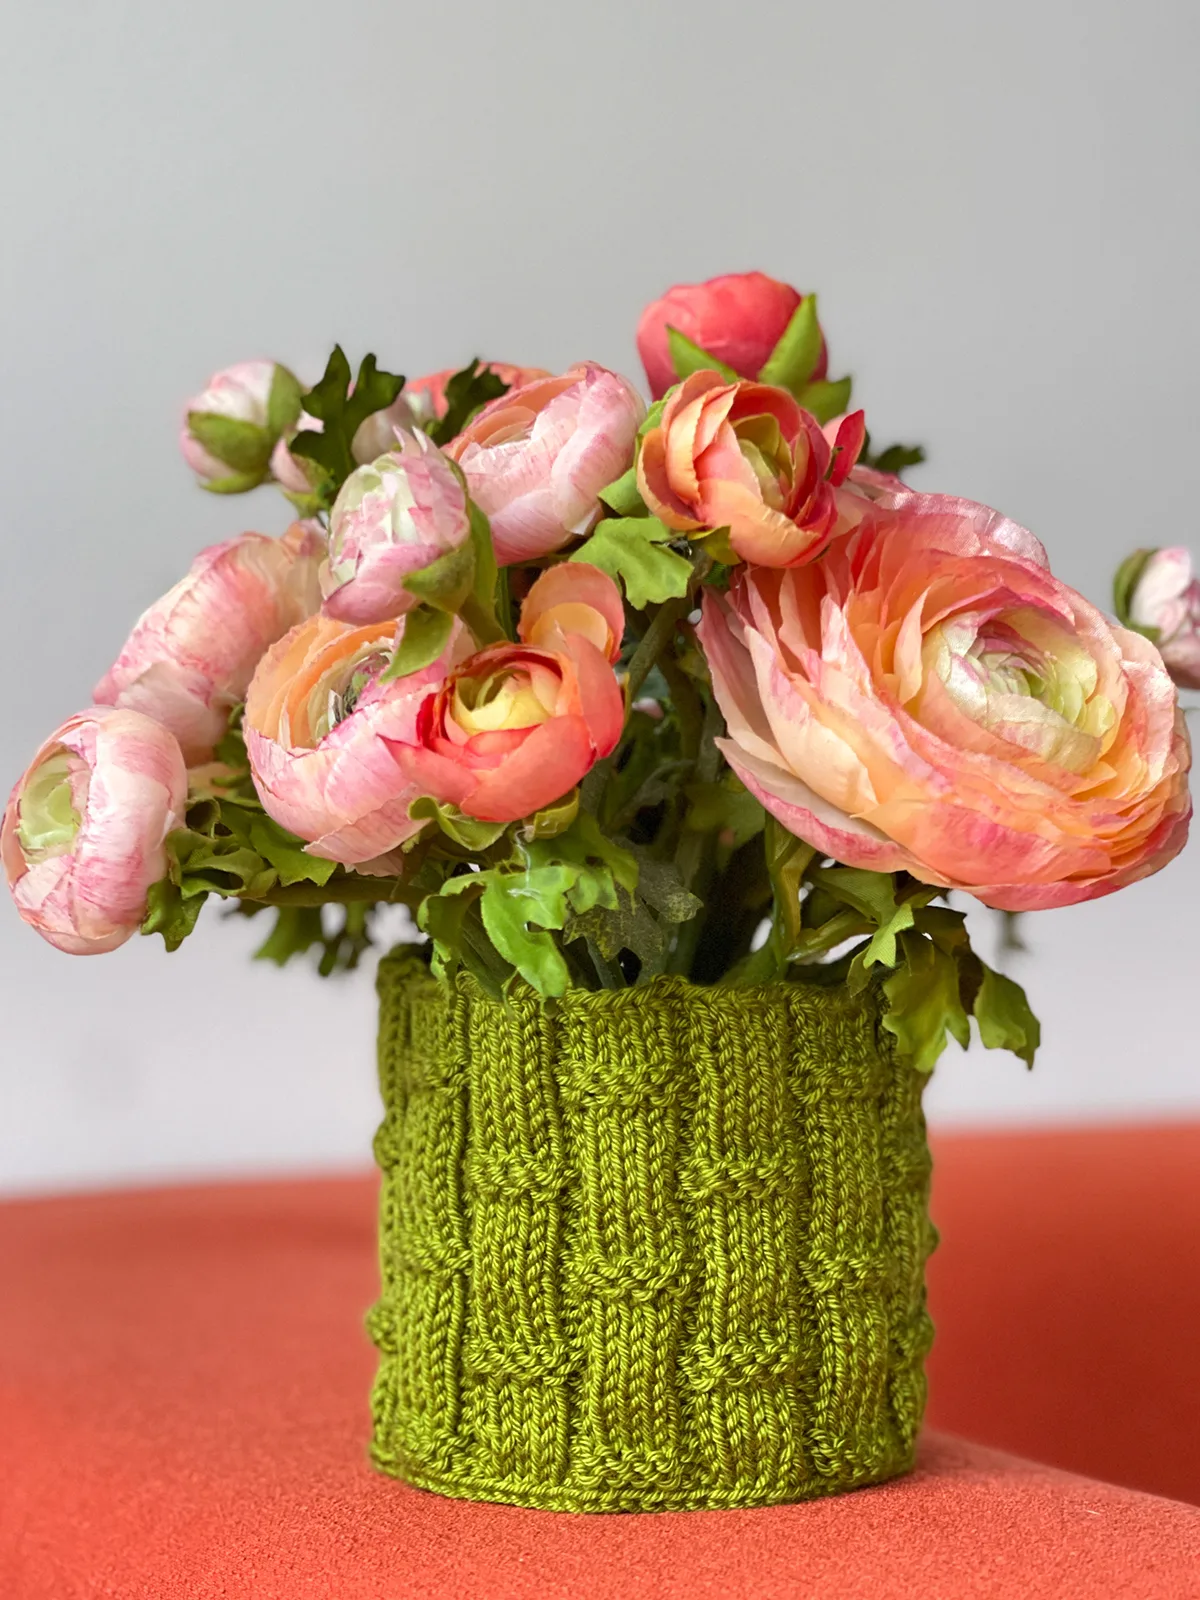 Knitted bamboo textured flower pot cover in green yarn holding peach and pink colored peony flowers.